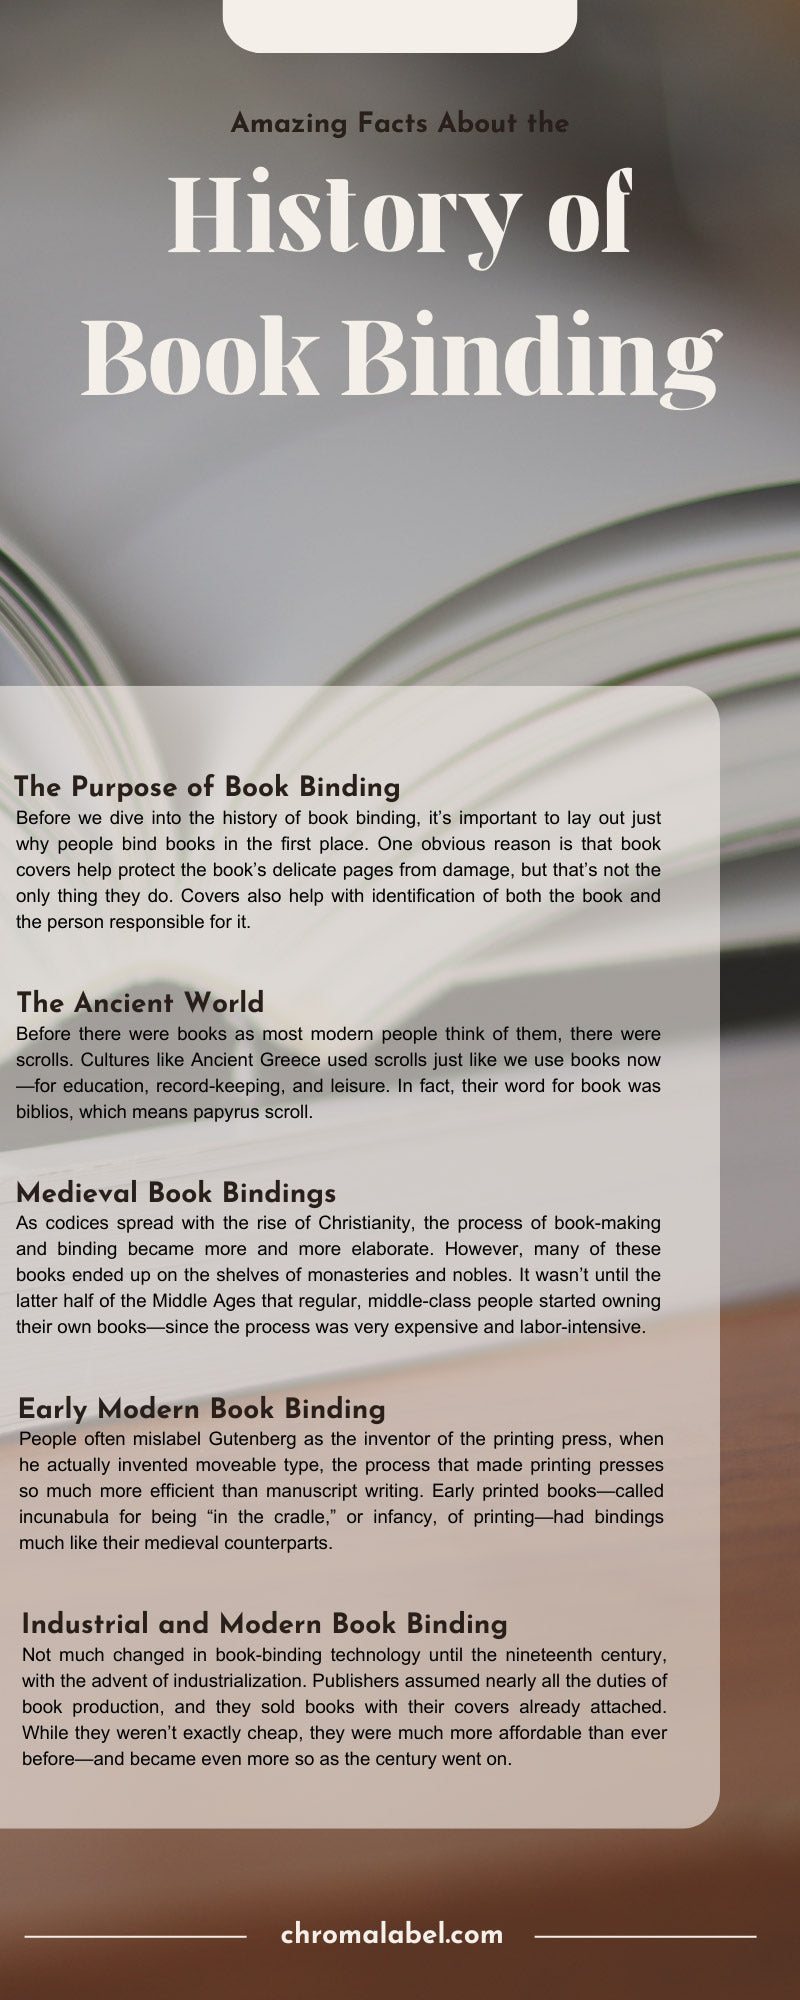 Amazing Facts About the History of Book Binding